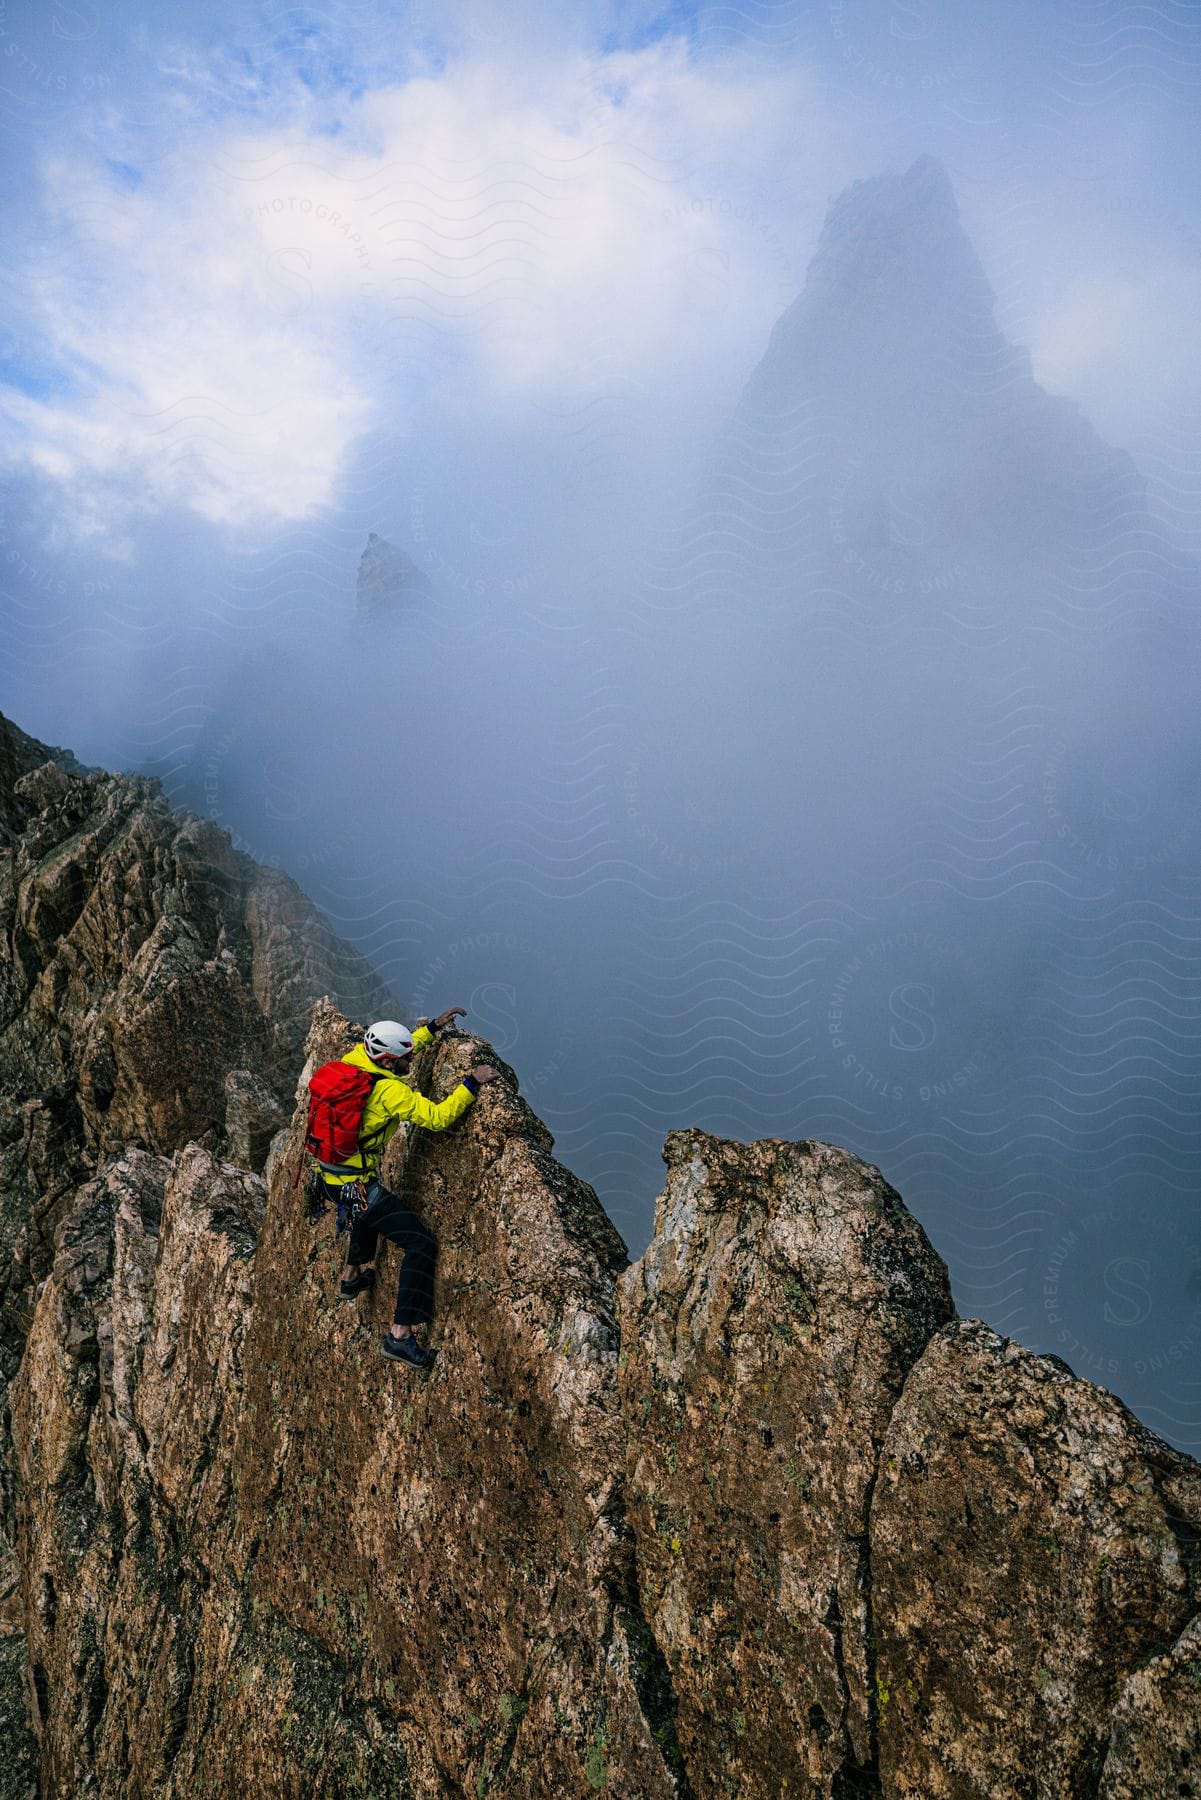 Climber ascending foggy mountain with other obscured peaks in the background